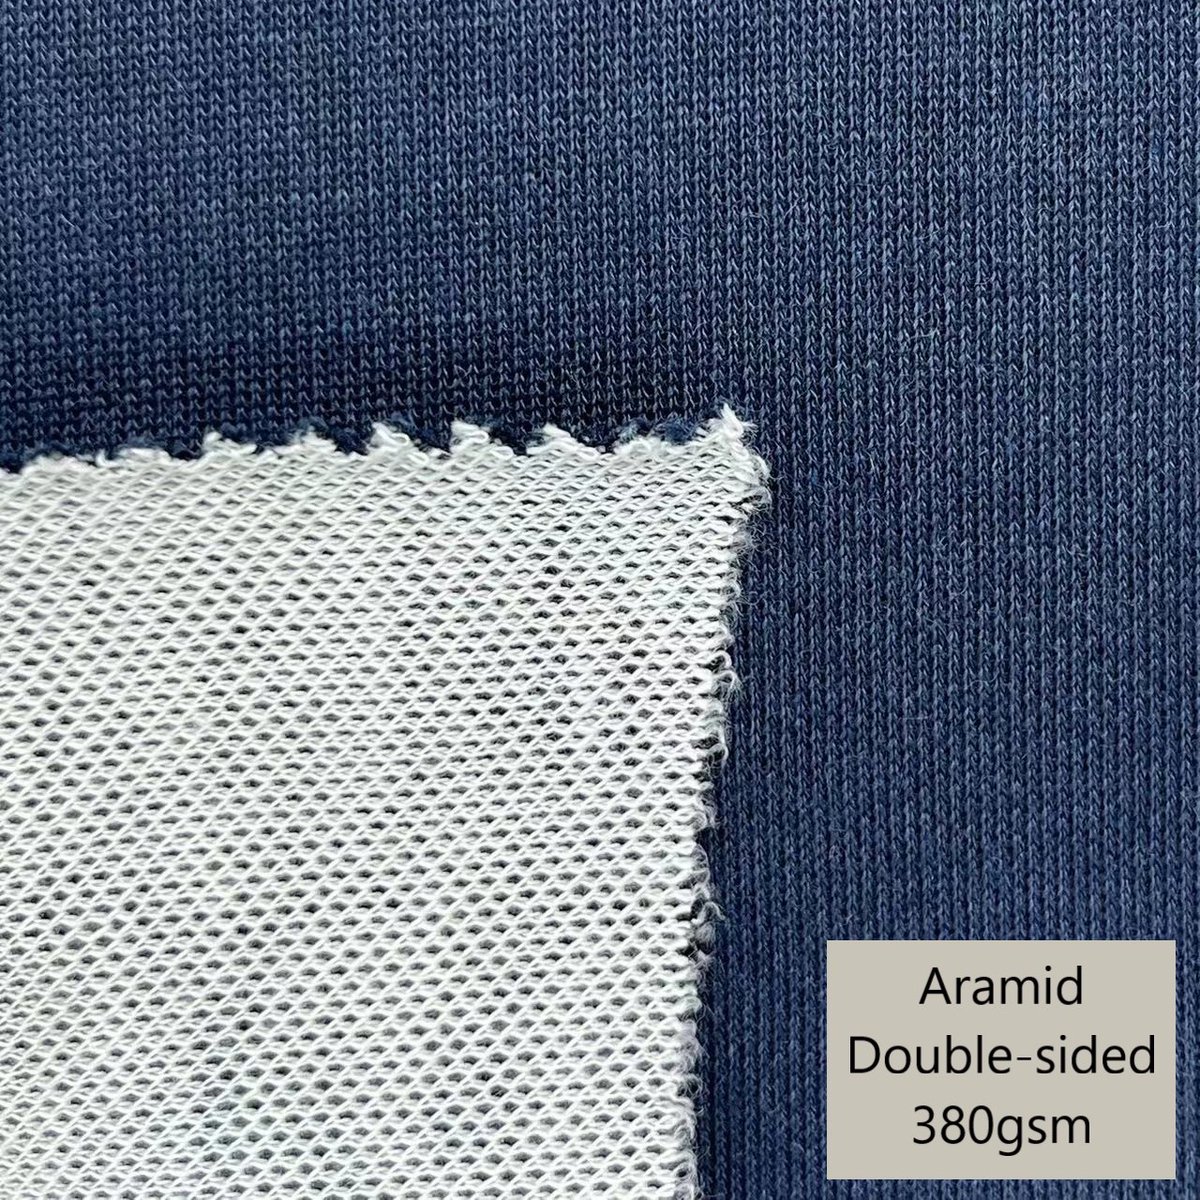 Double-sided aramid for fire-resistant gloves
Composition: Aramid1414/ Aramid1313/ Polyester
Weight: 380gsm

#aramid #fireresistant #firefighting #firefightinggloves #aramidgloves #FR